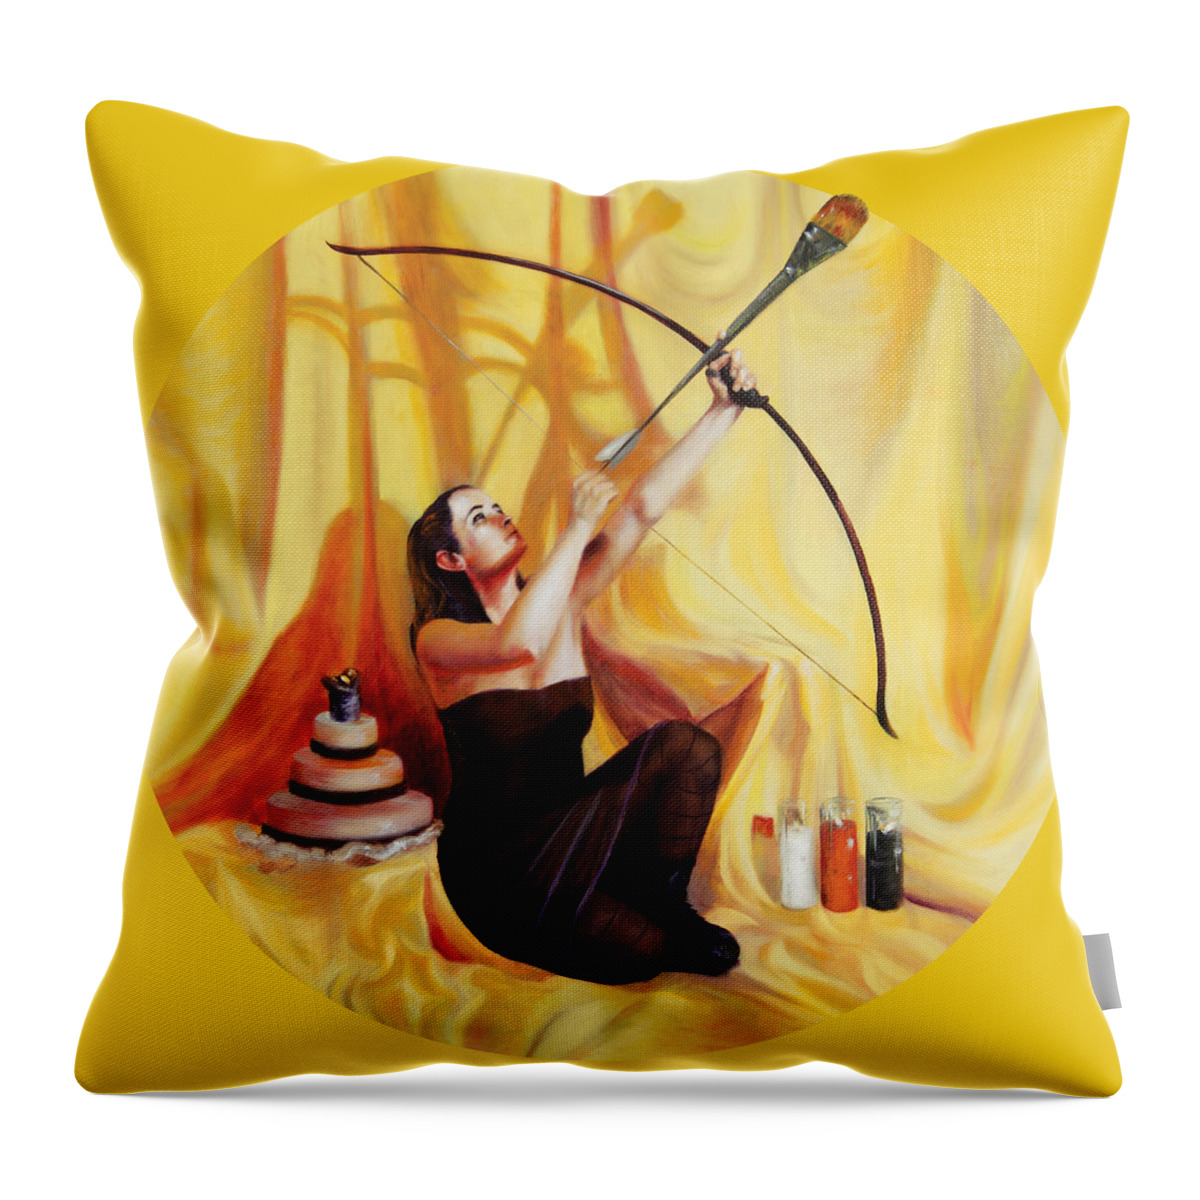 Shelley Irish Throw Pillow featuring the painting The Markswoman by Shelley Irish